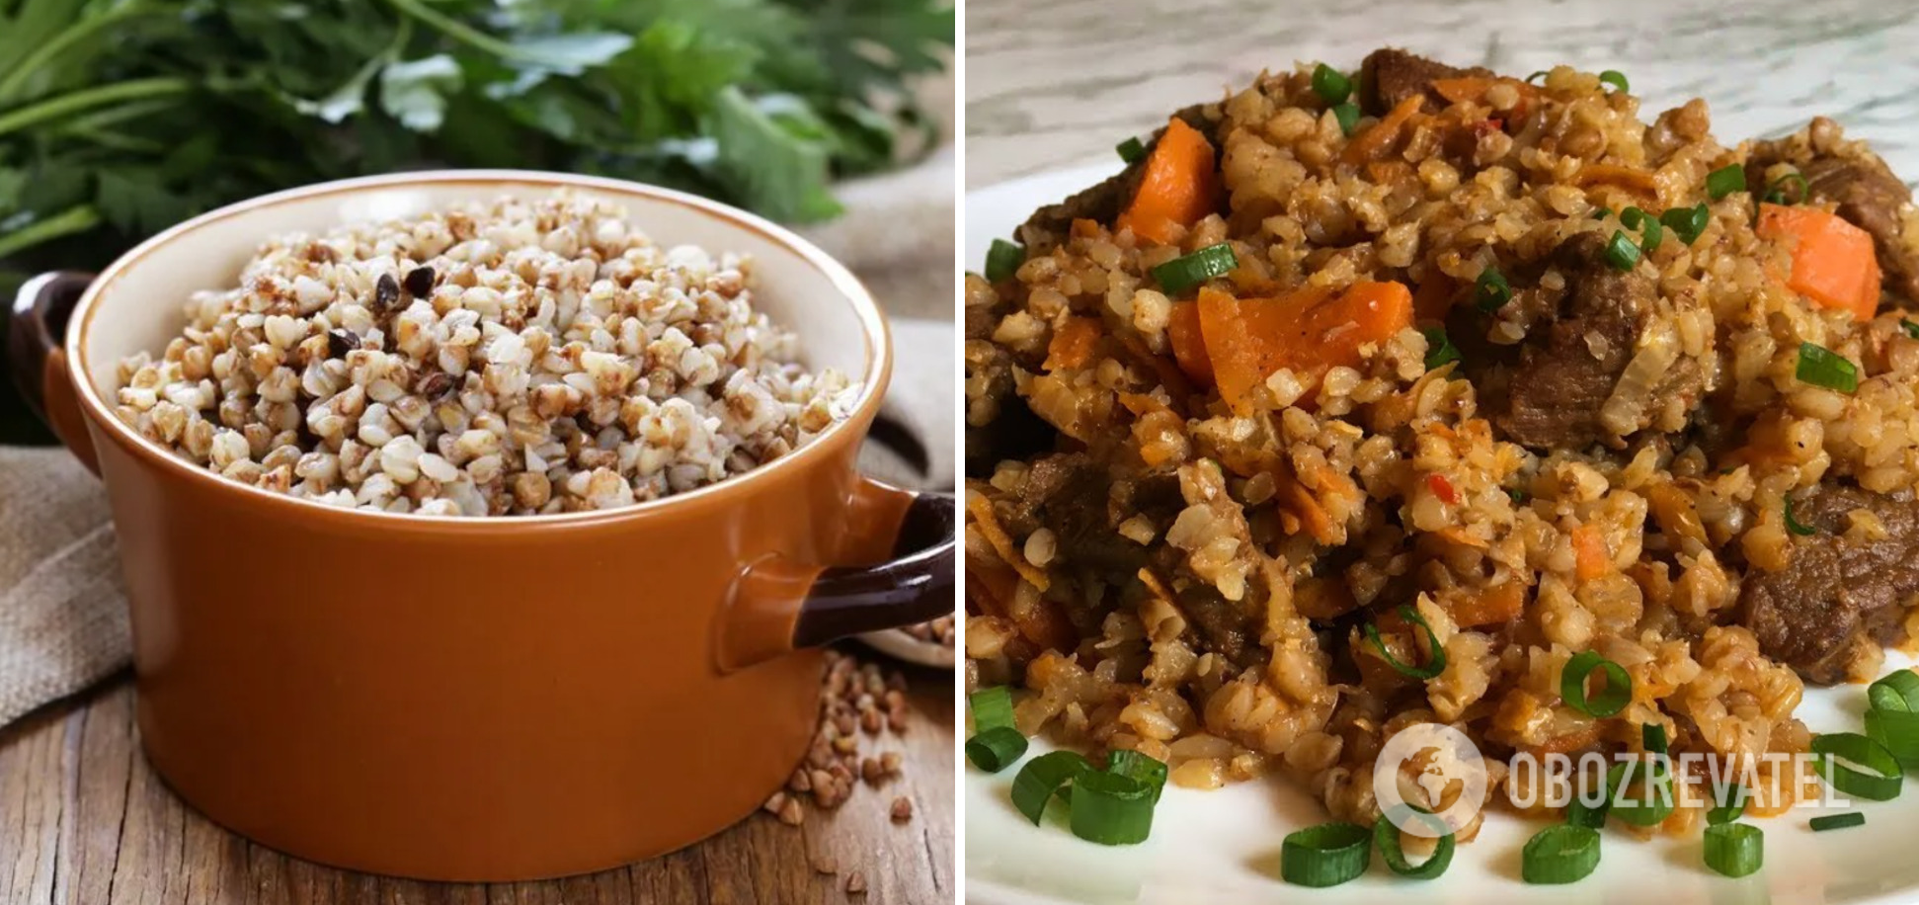 How not to cook buckwheat: the most common mistakes